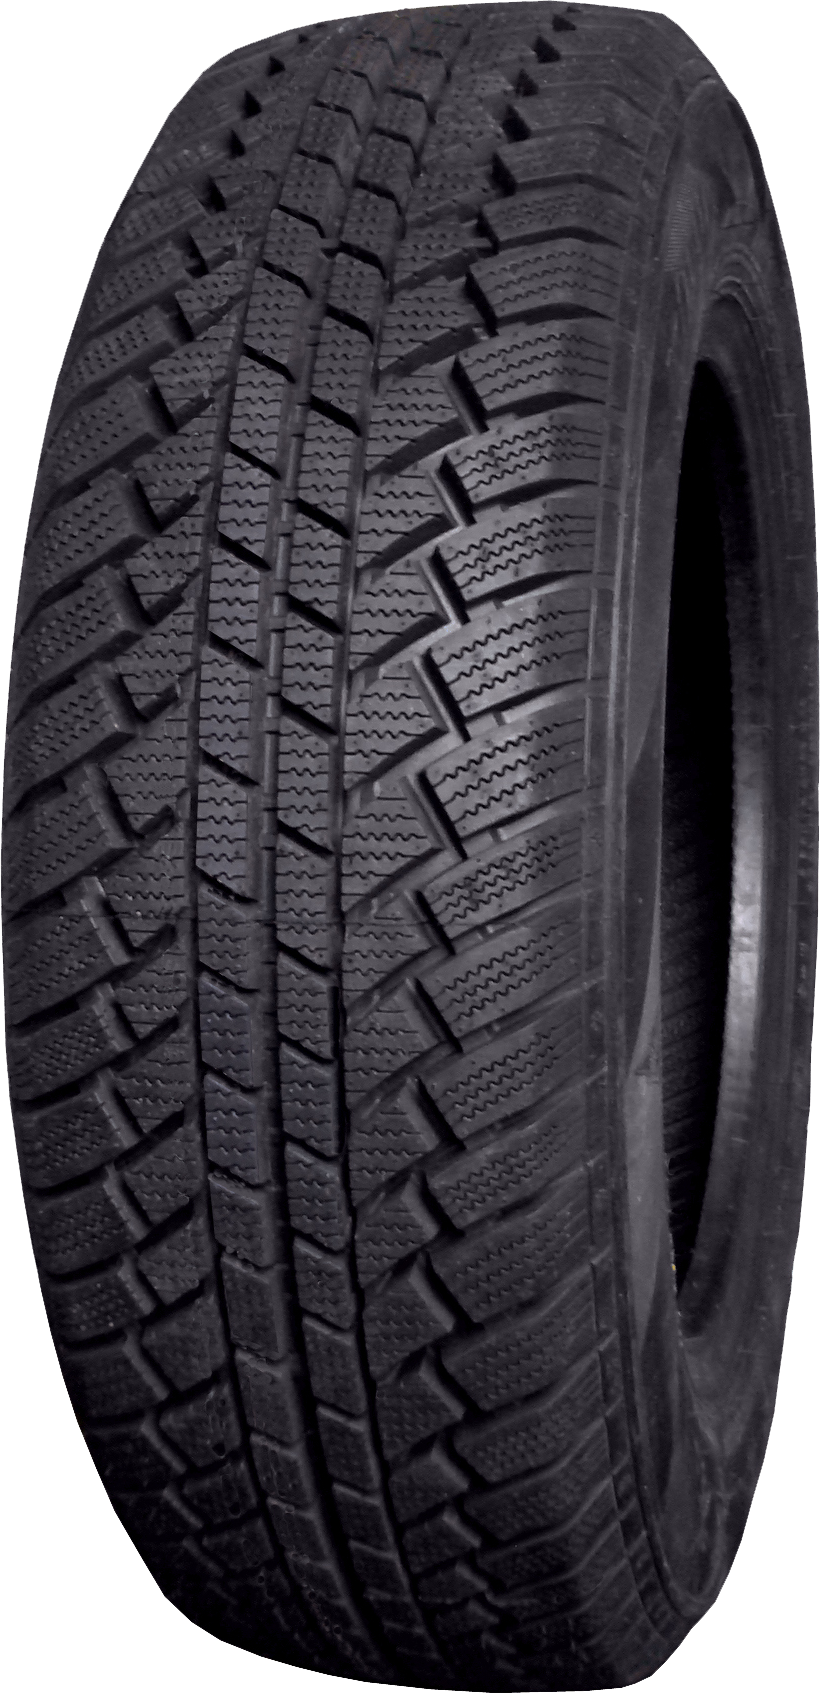 Gomme Nuove Infinity 205/65 R16C 107R INF-059 M+S pneumatici nuovi Invernale